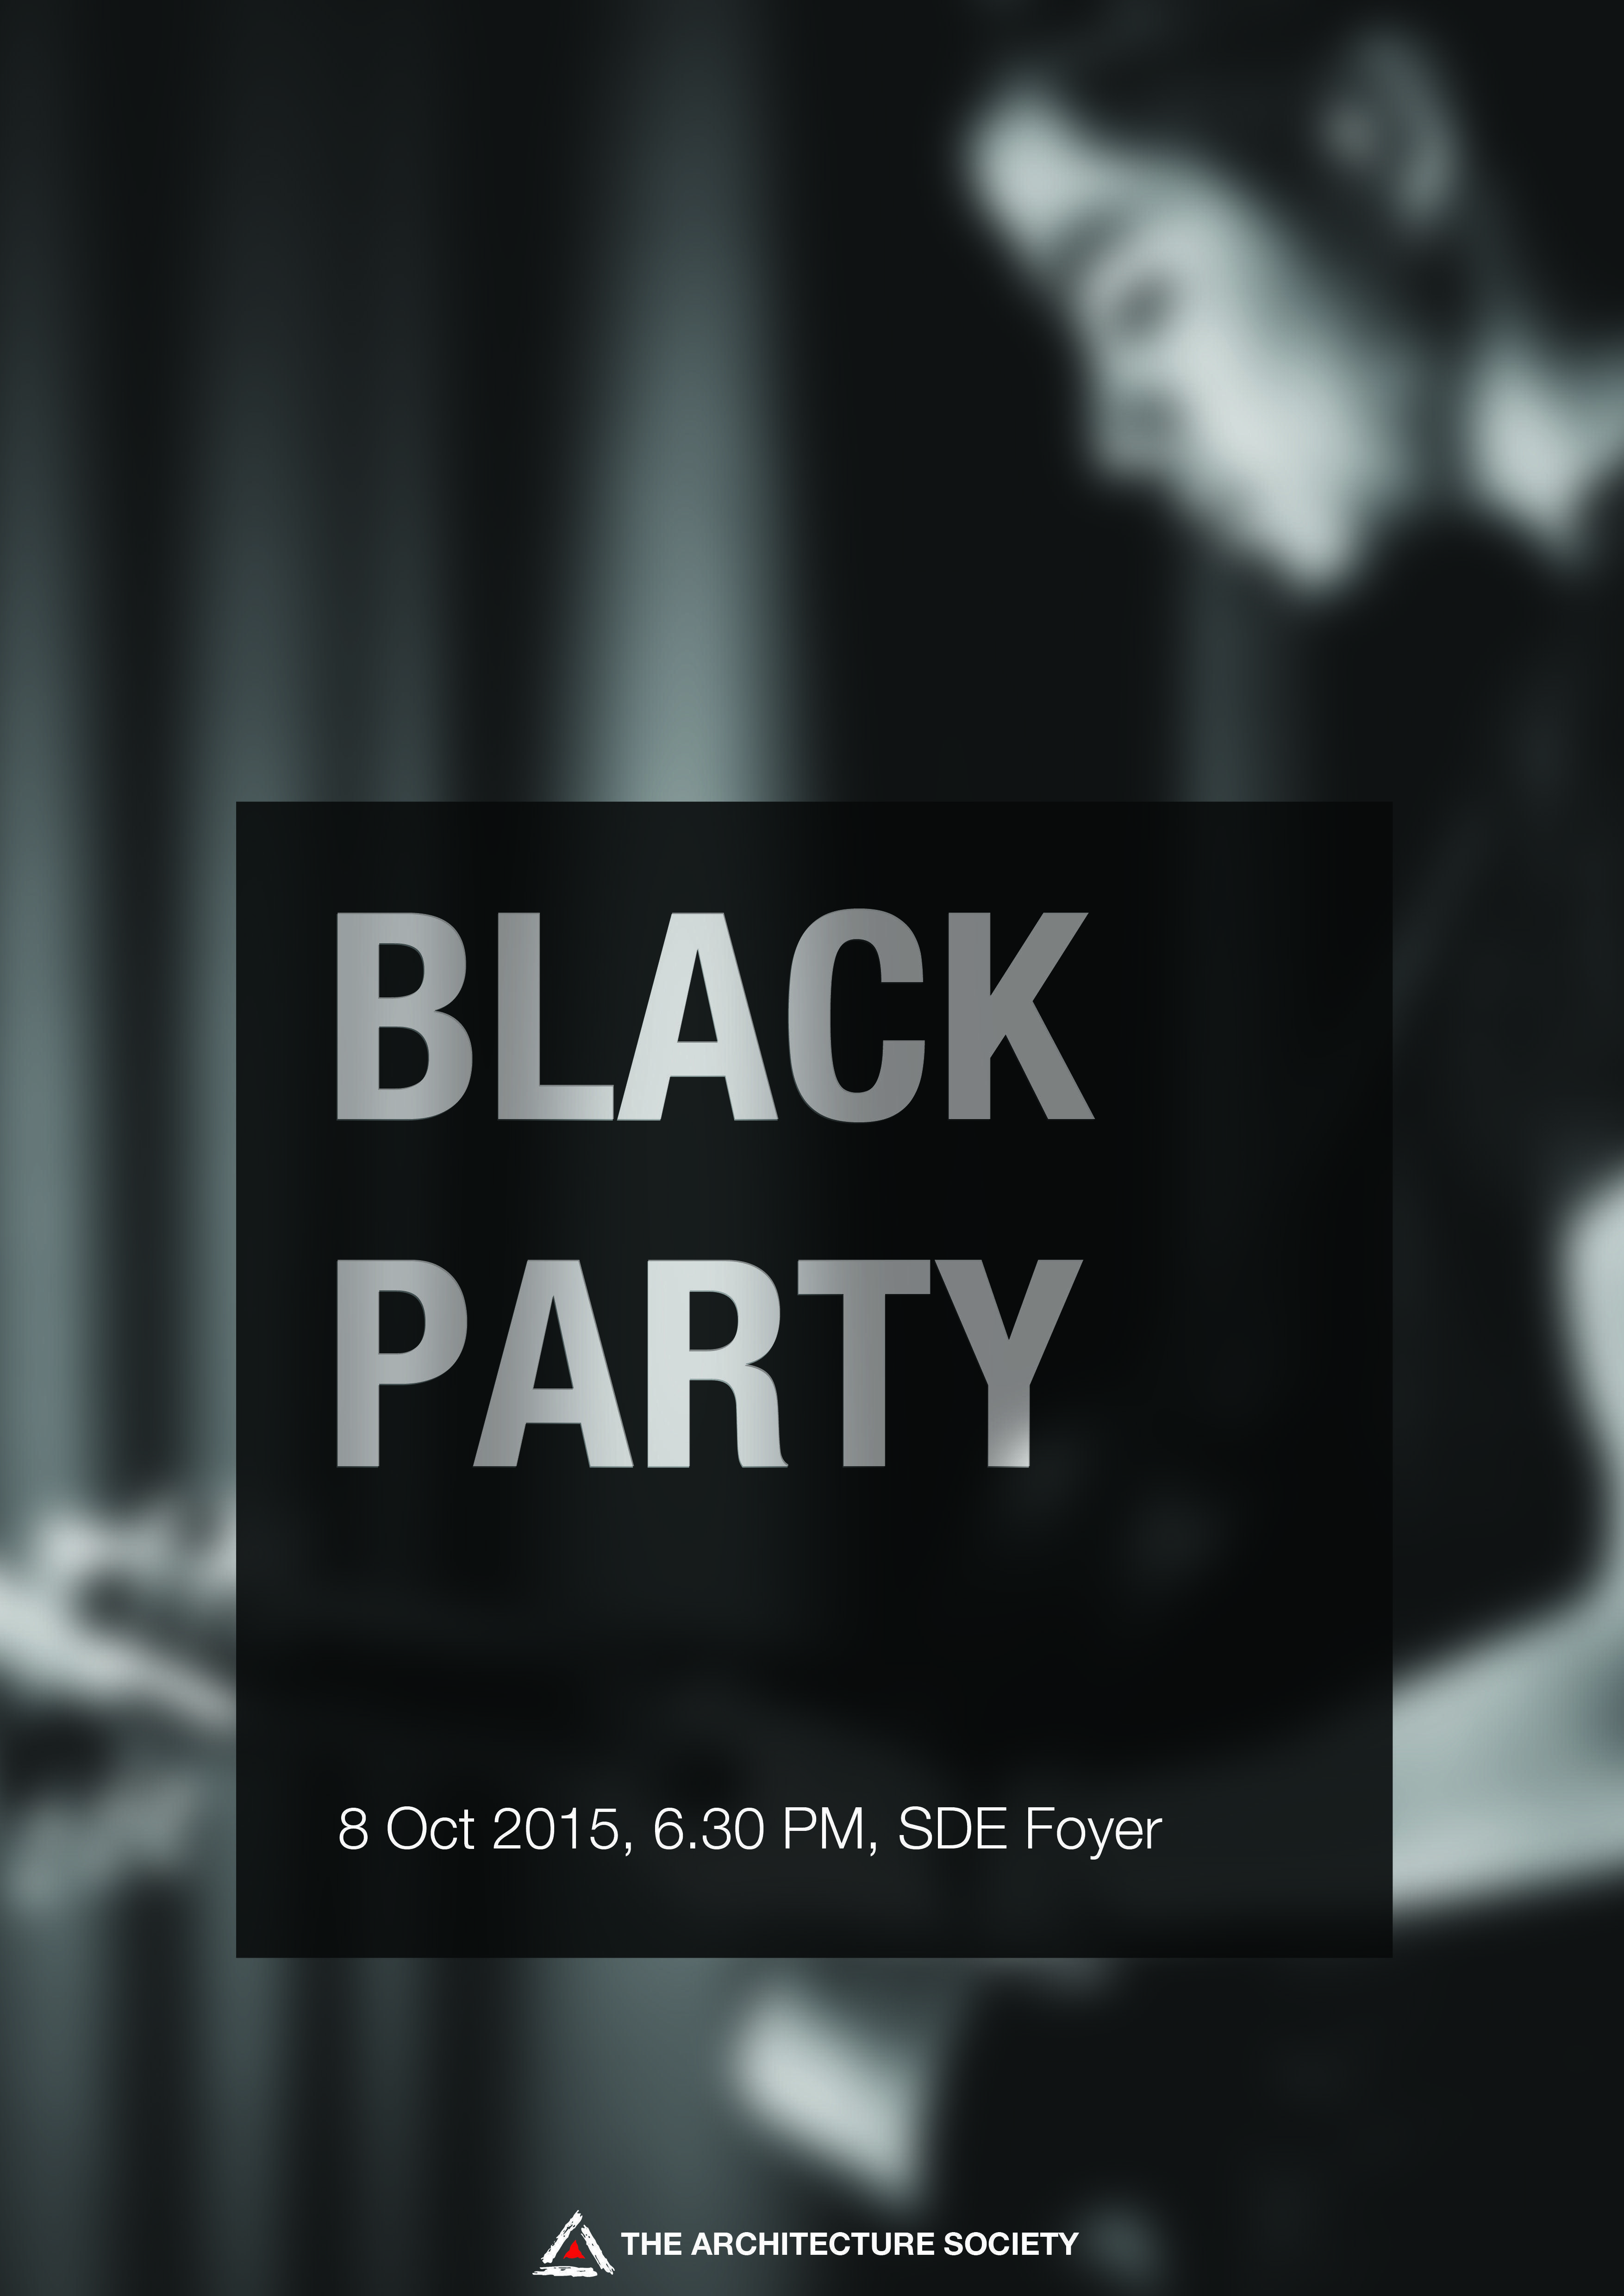 Black Party Logo - BLACK PARTY 2015. The Architecture Society